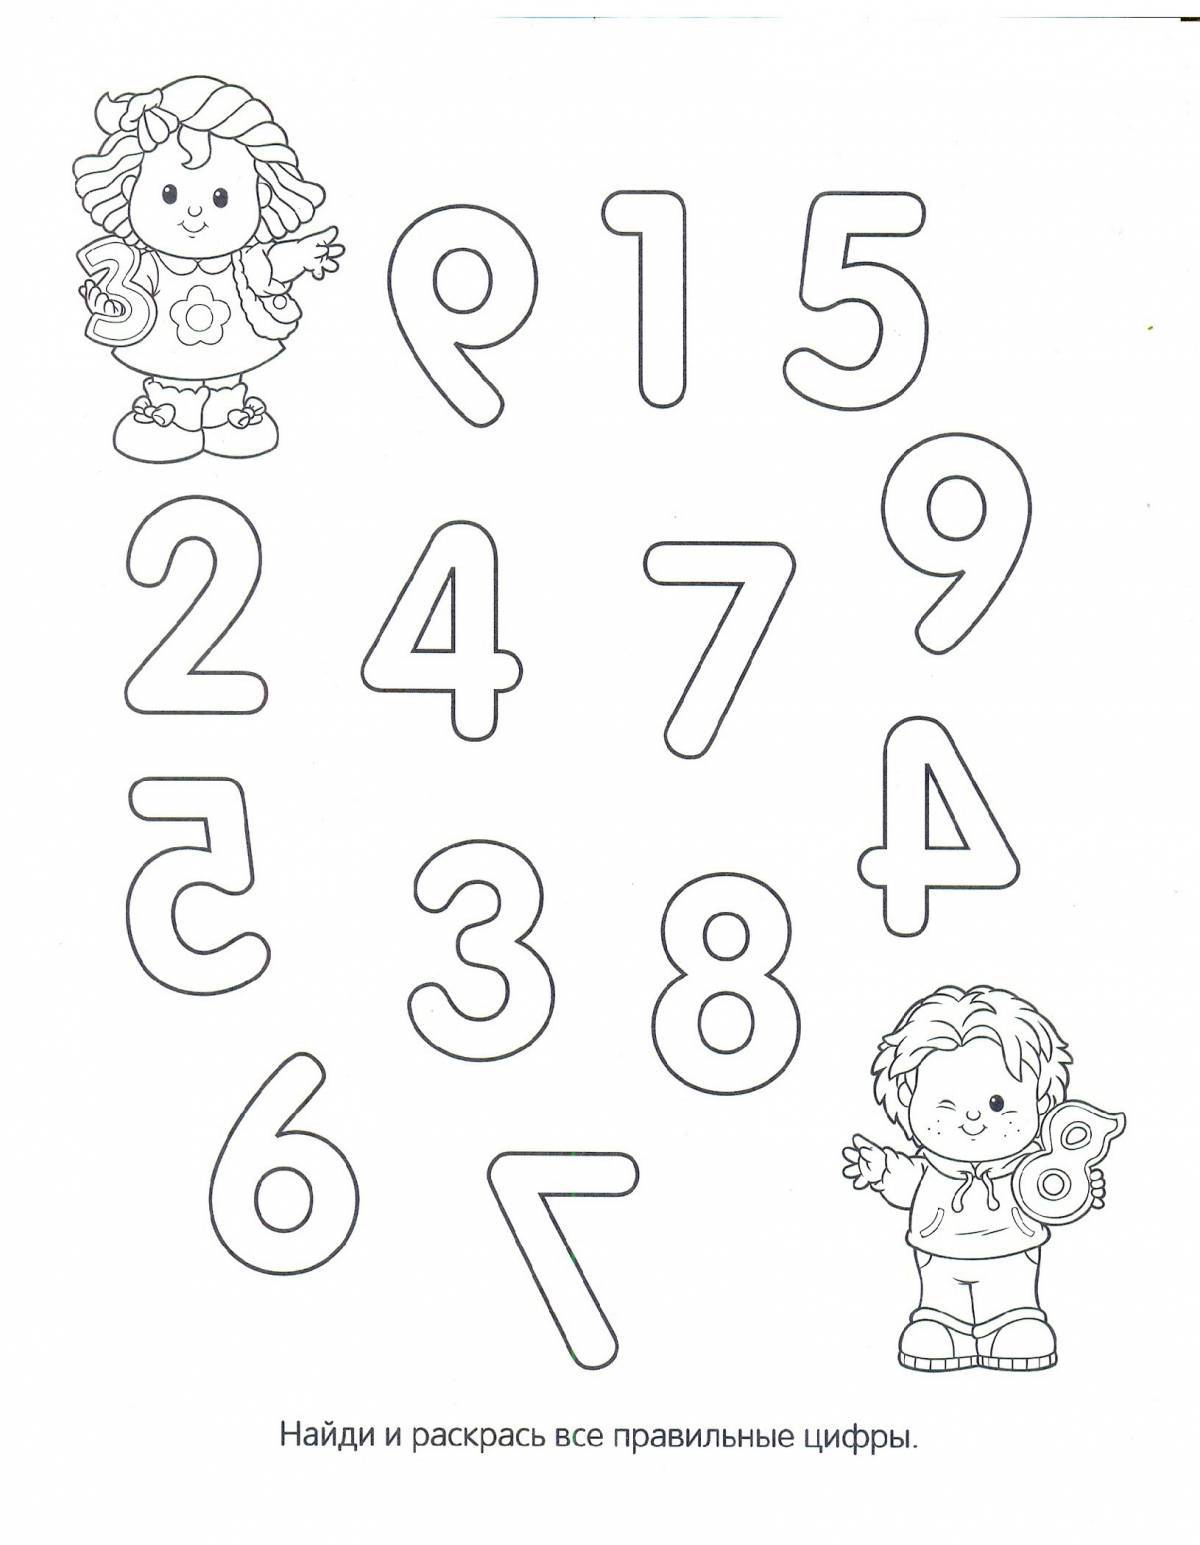 Numbers for children #16